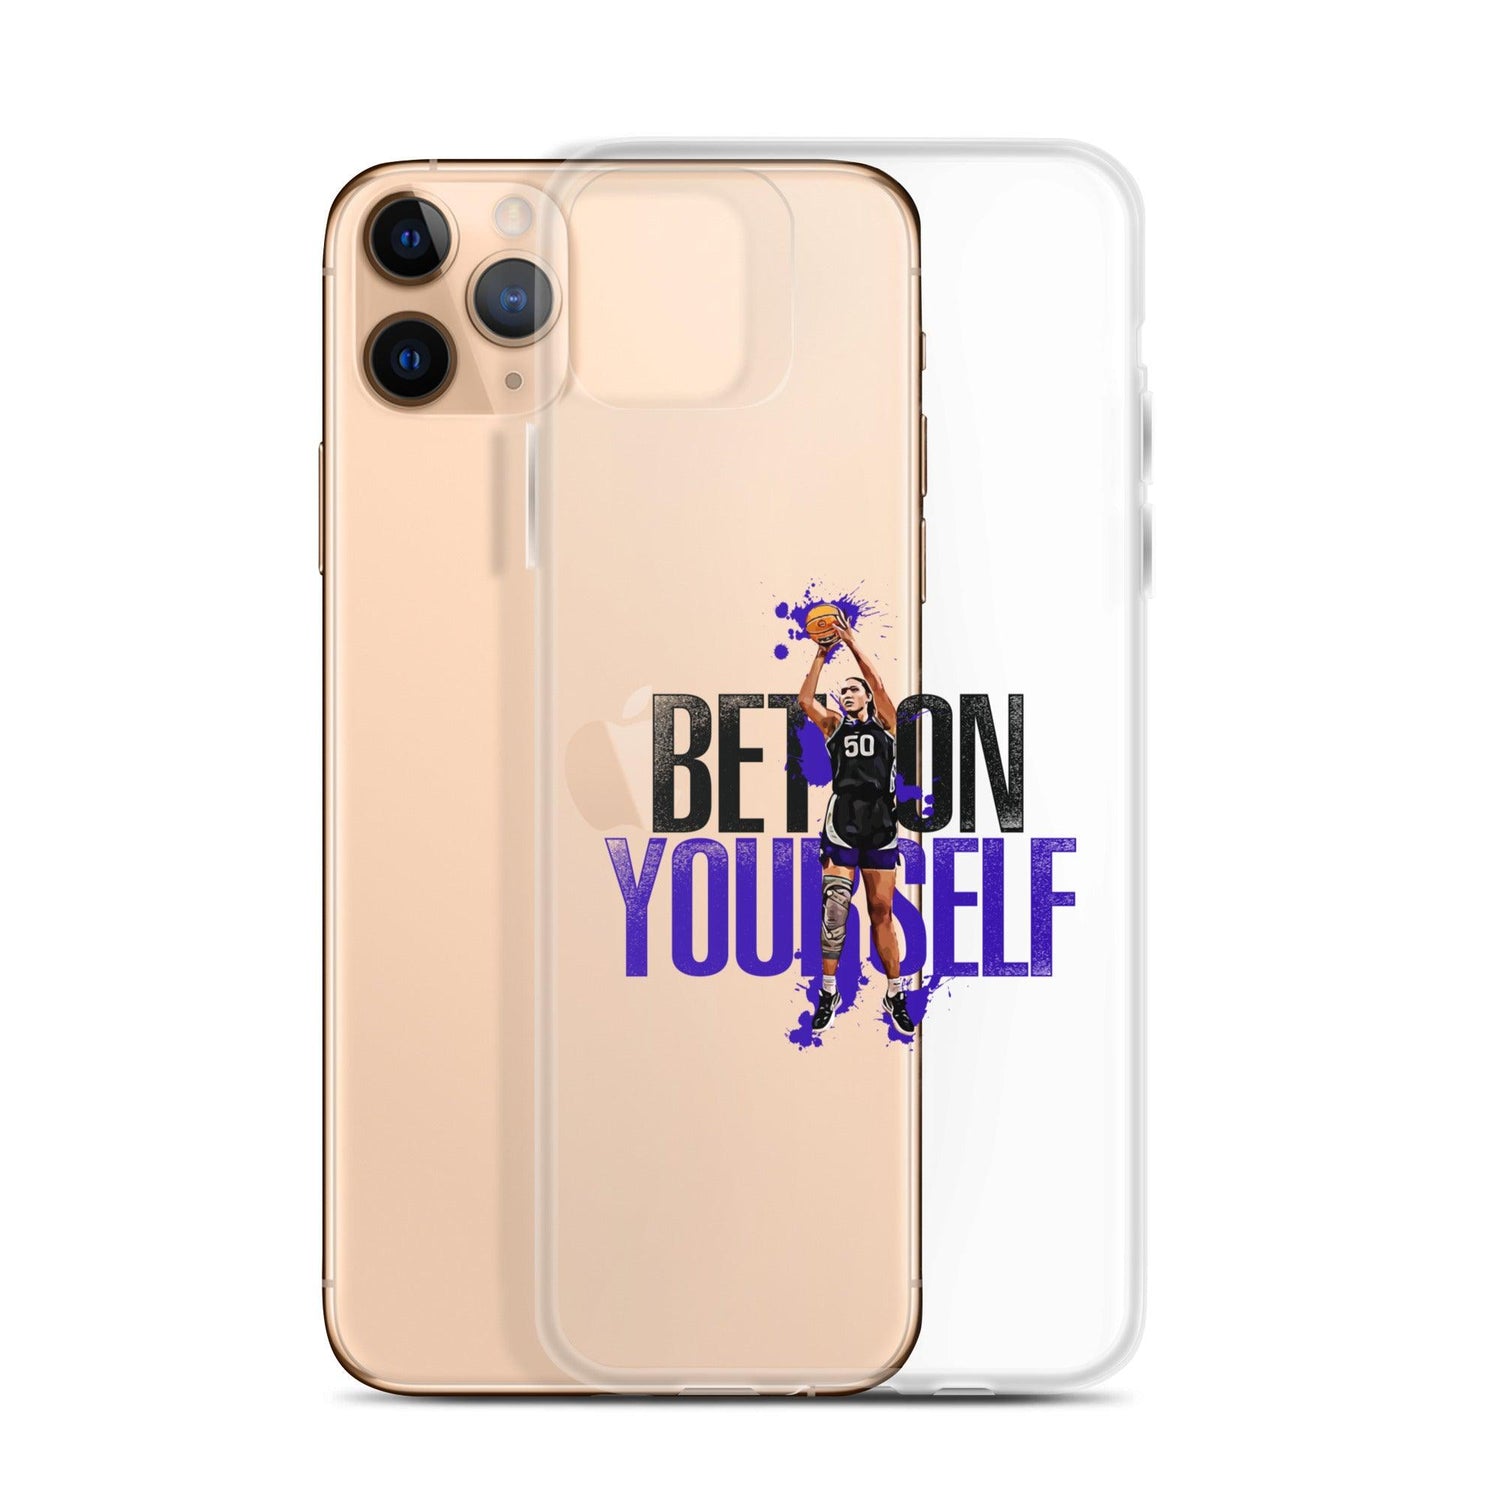 Ayoka Lee "Bet On Yourself" iPhone Case - Fan Arch